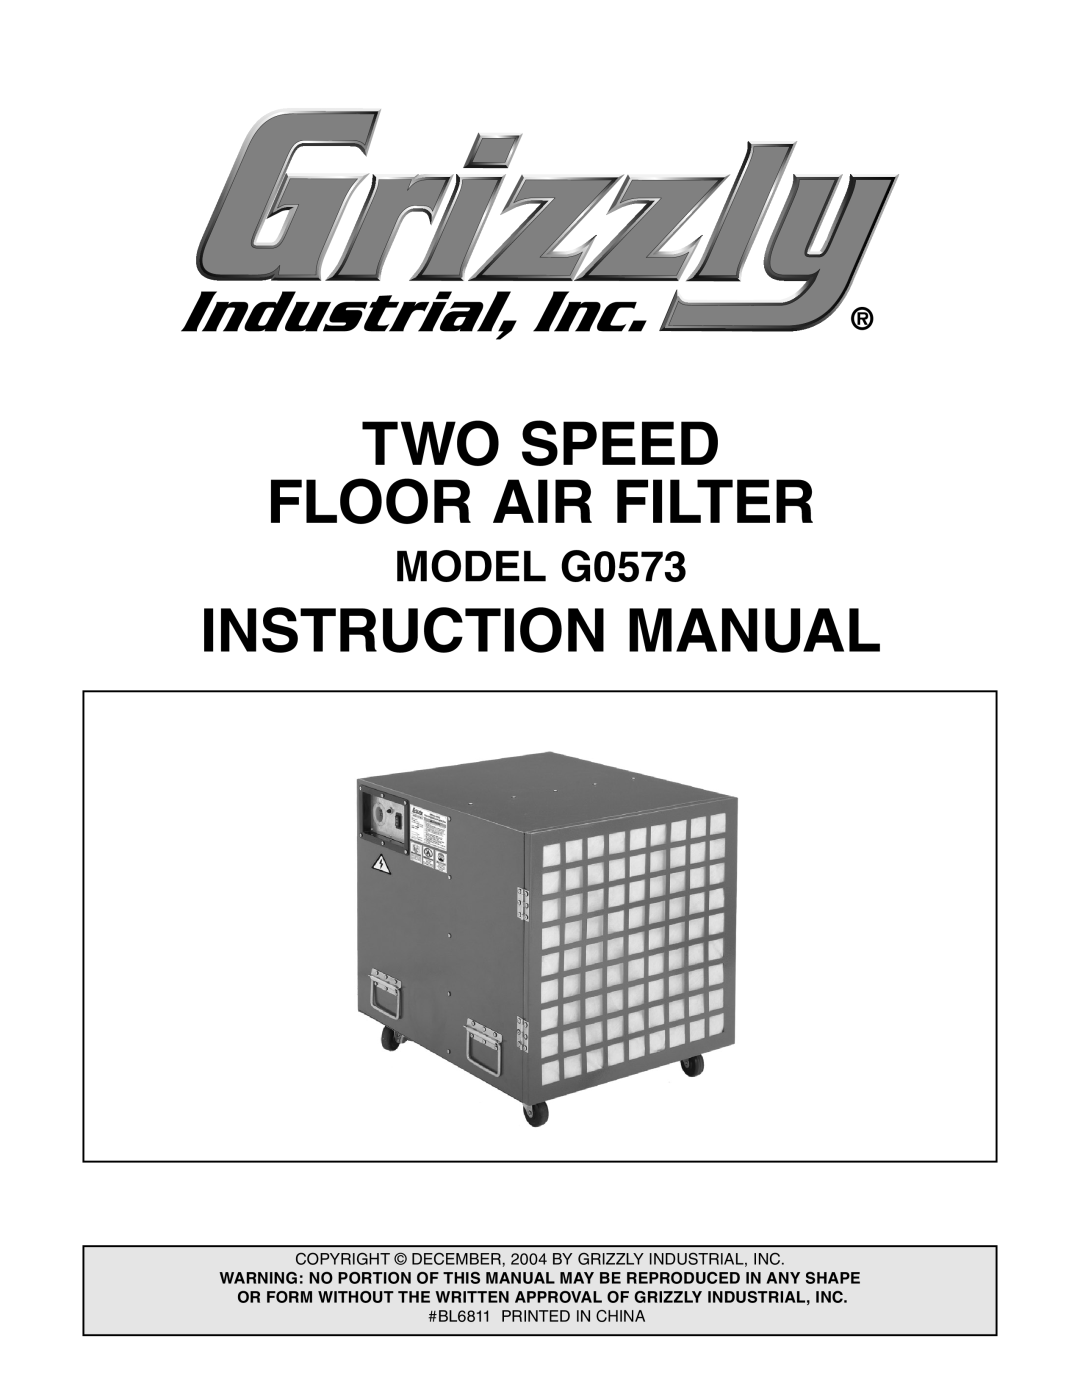 Grizzly instruction manual MODEL G0573, Two Speed Floor Air Filter 